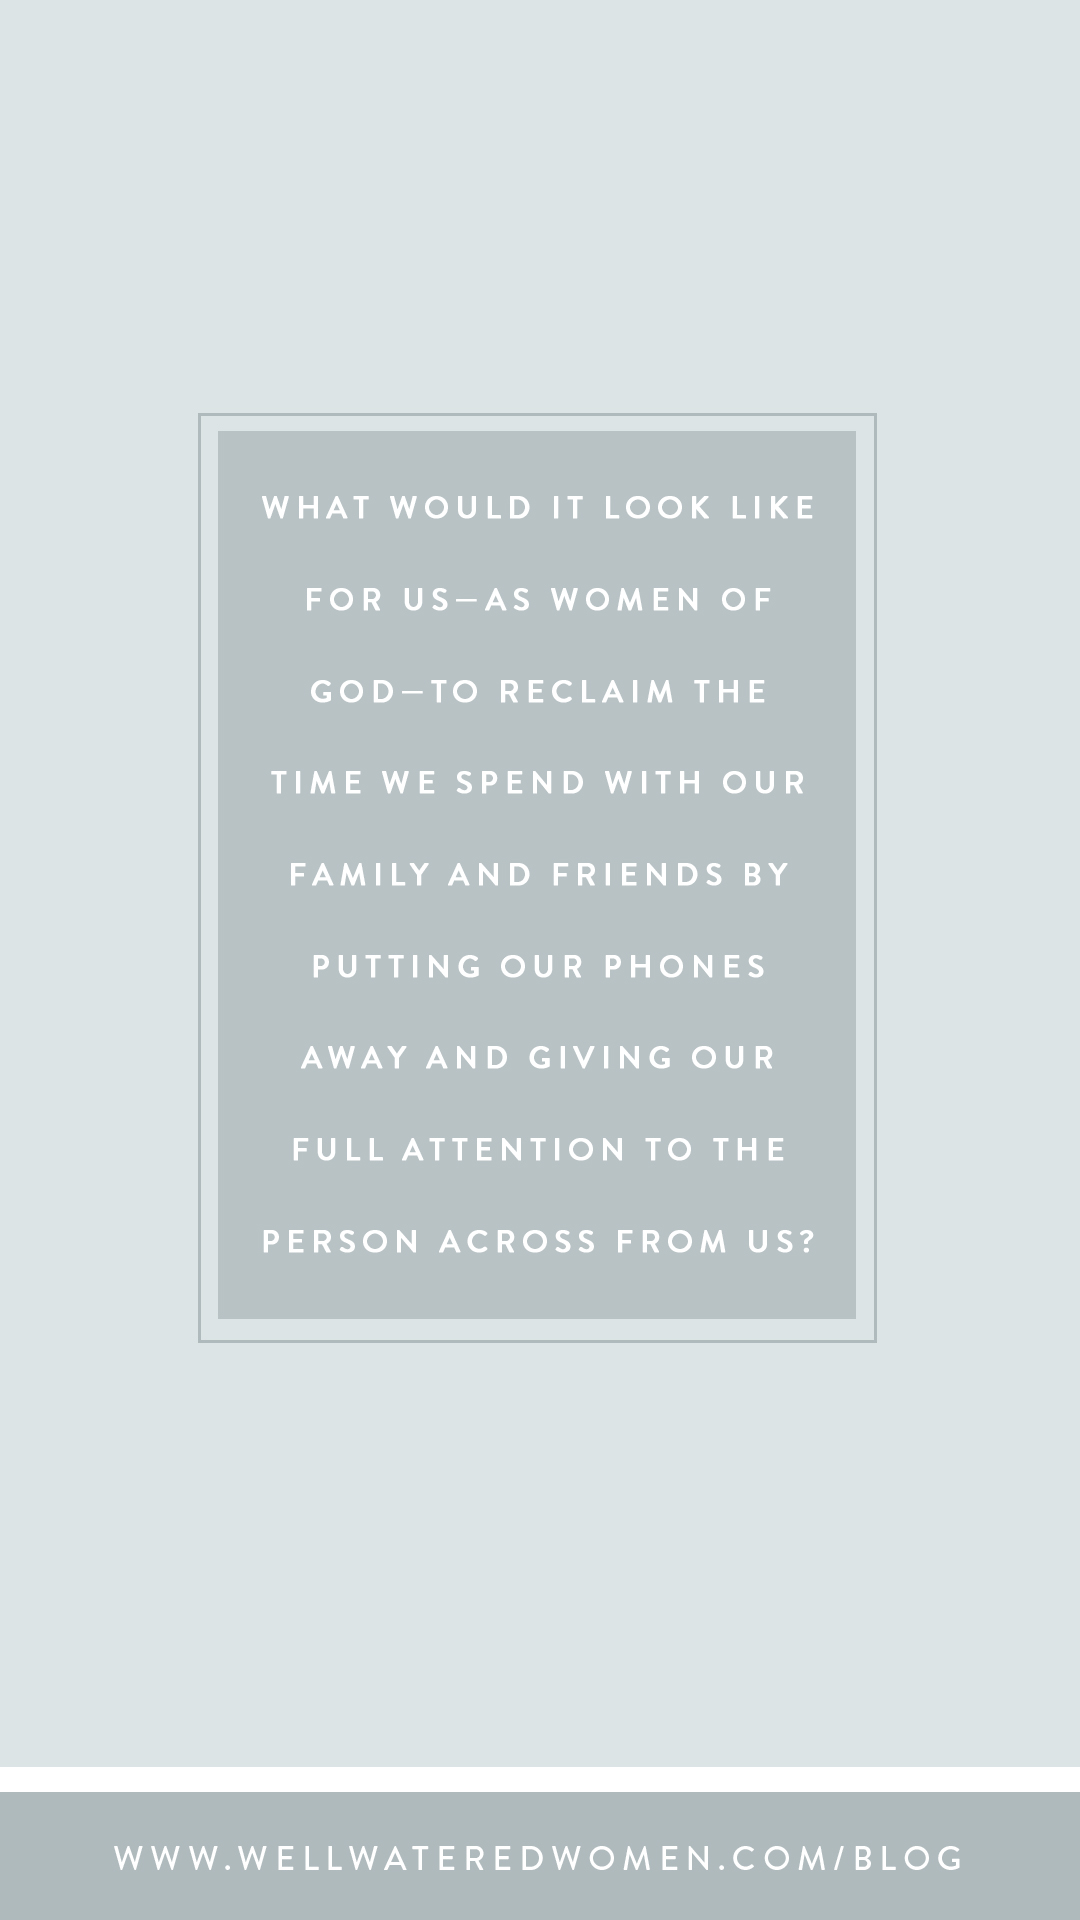 When Online Became Everywhere: What would it look like for us—as women of God—to reclaim the time we spend with our family and friends by putting our phones away and giving our full attention to the person across from us?